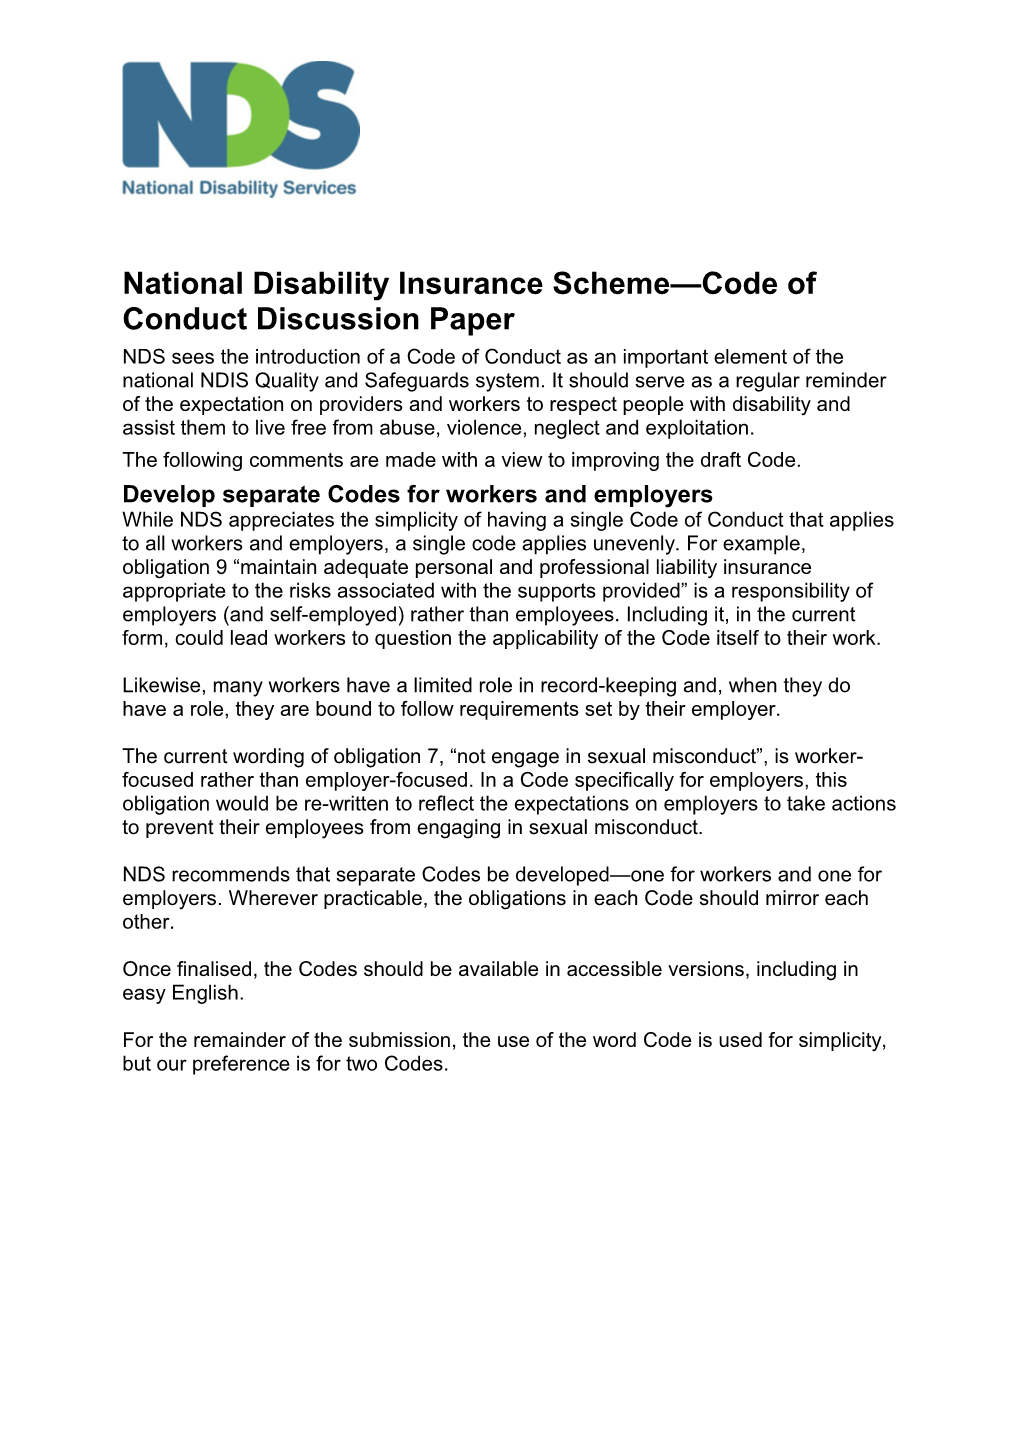 National Disability Insurance Scheme Code of Conduct Discussion Paper